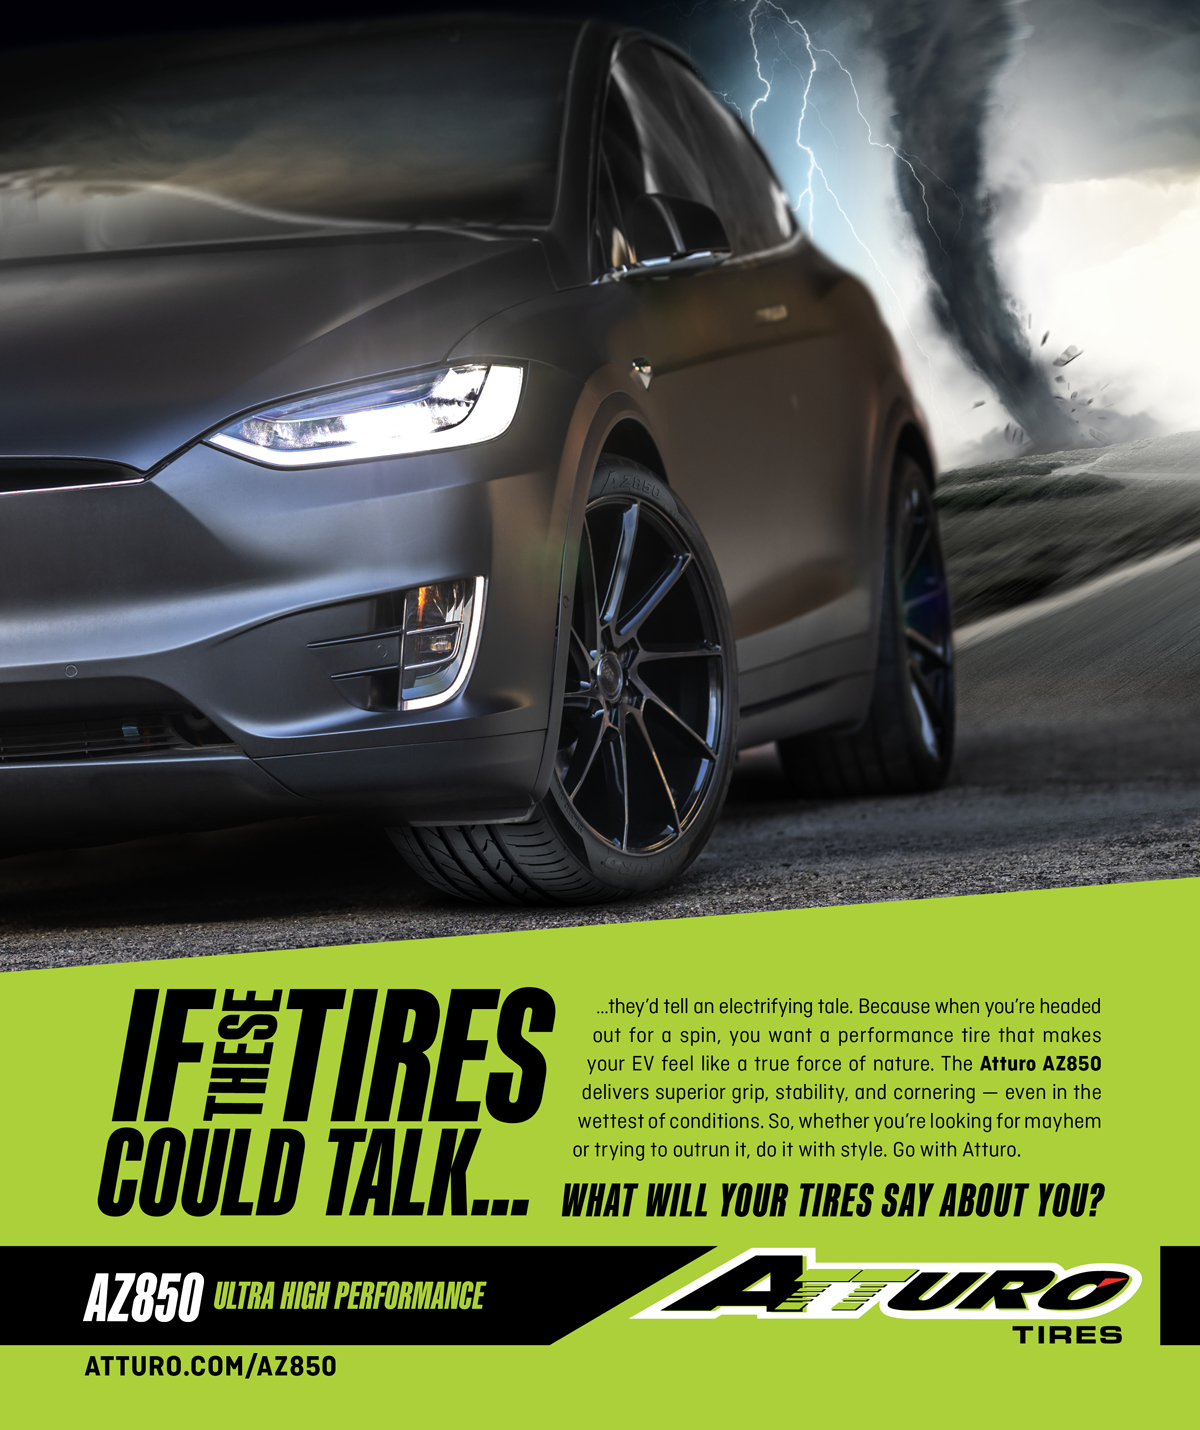 Atturo Tires - Print Ad - If These Tires Could Talk - AZ850